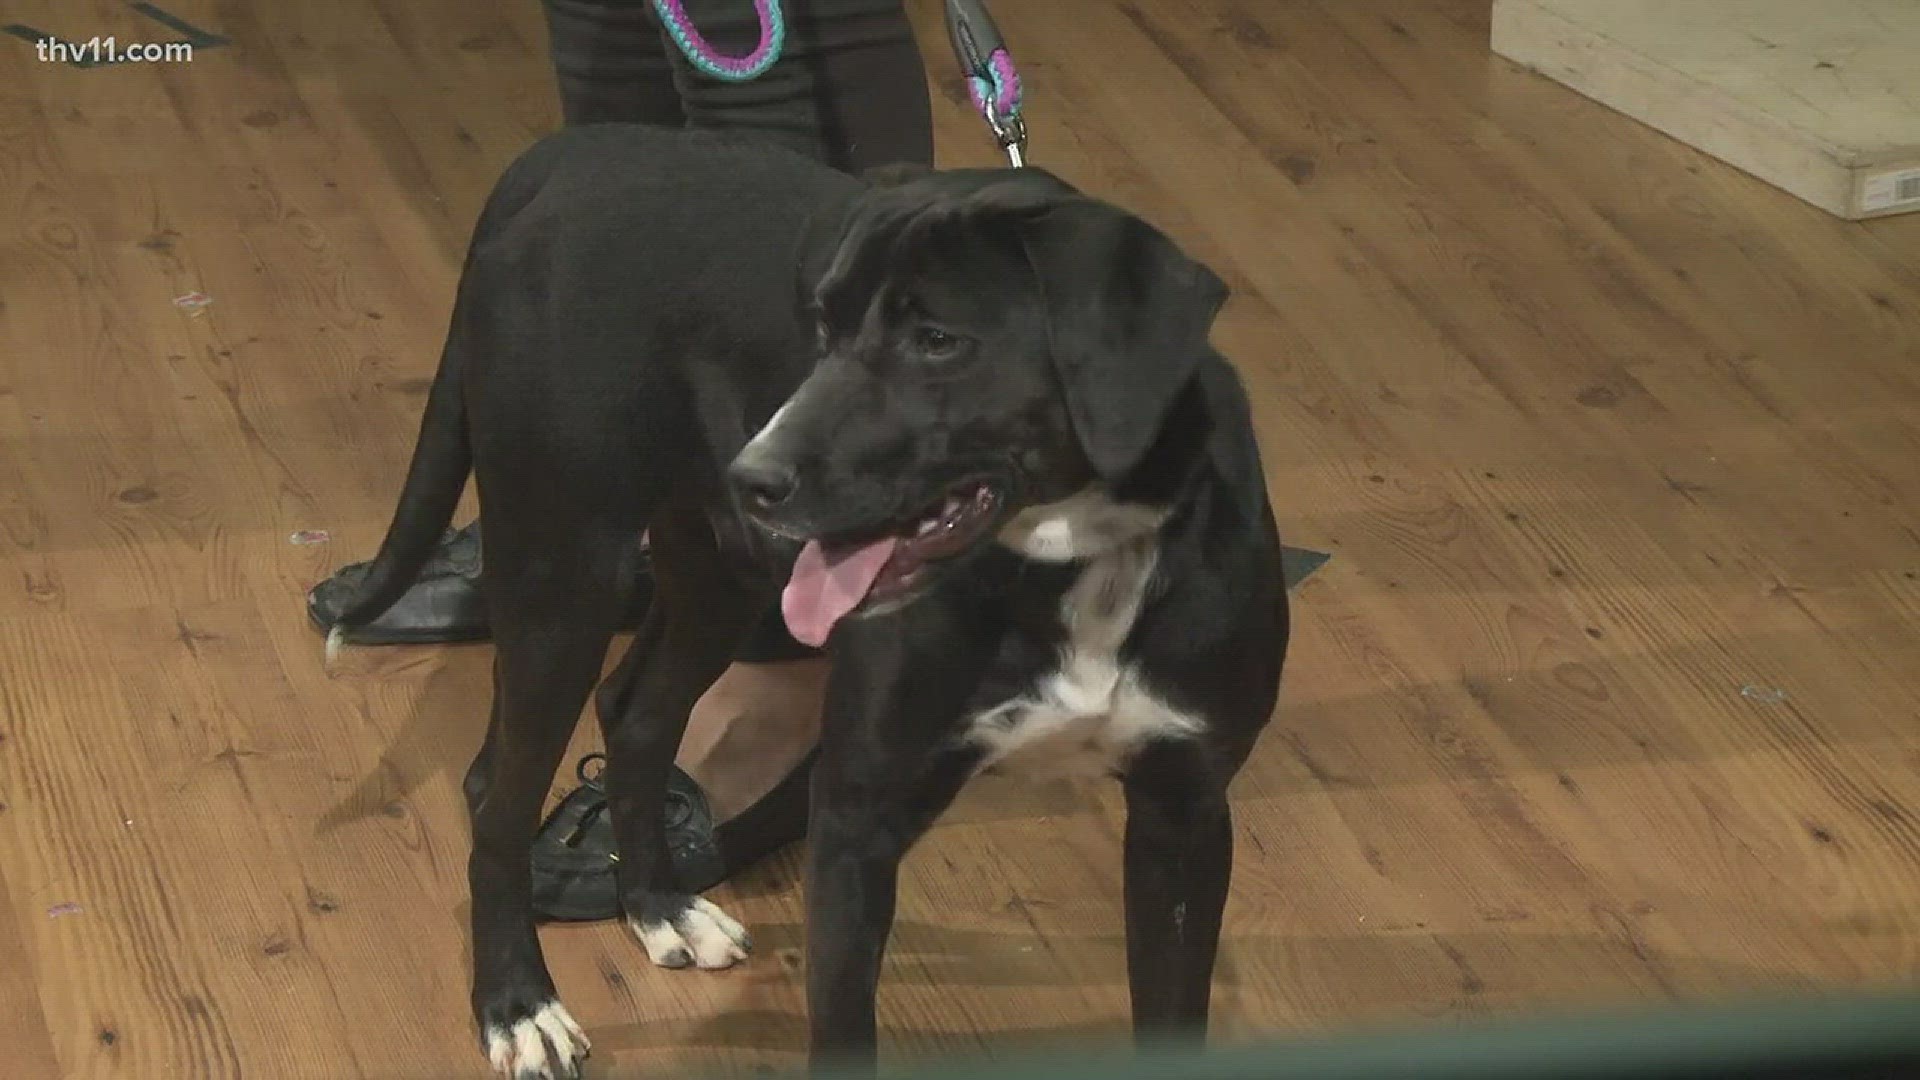 Betsy Robb with Friends of the Animal Village joined THV11 This Morning on Friday with Gomer, a lovable hound mix.